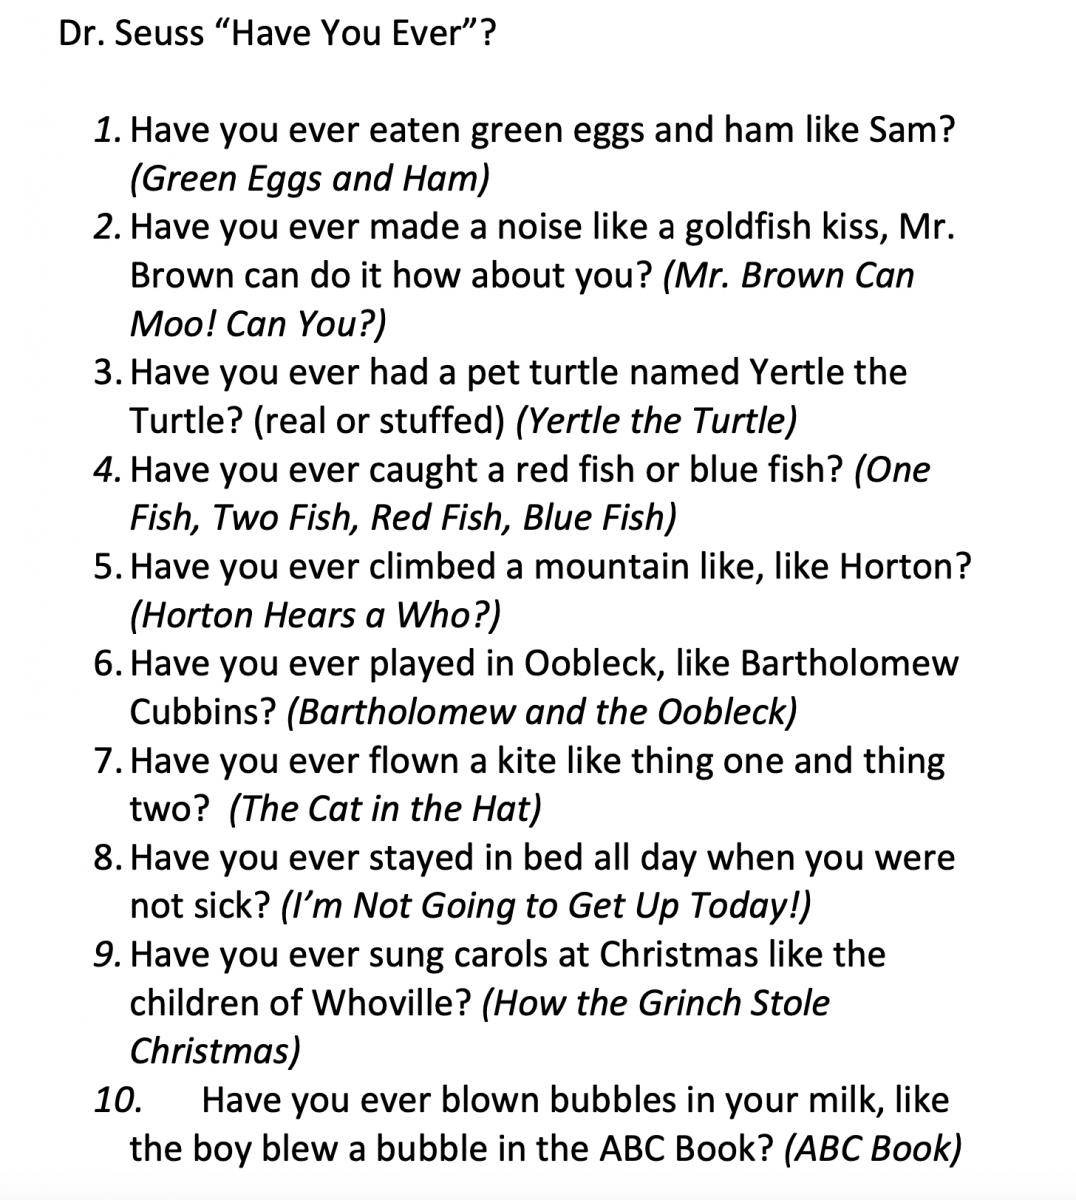 Dr. Seuss "Have You Ever?" Game